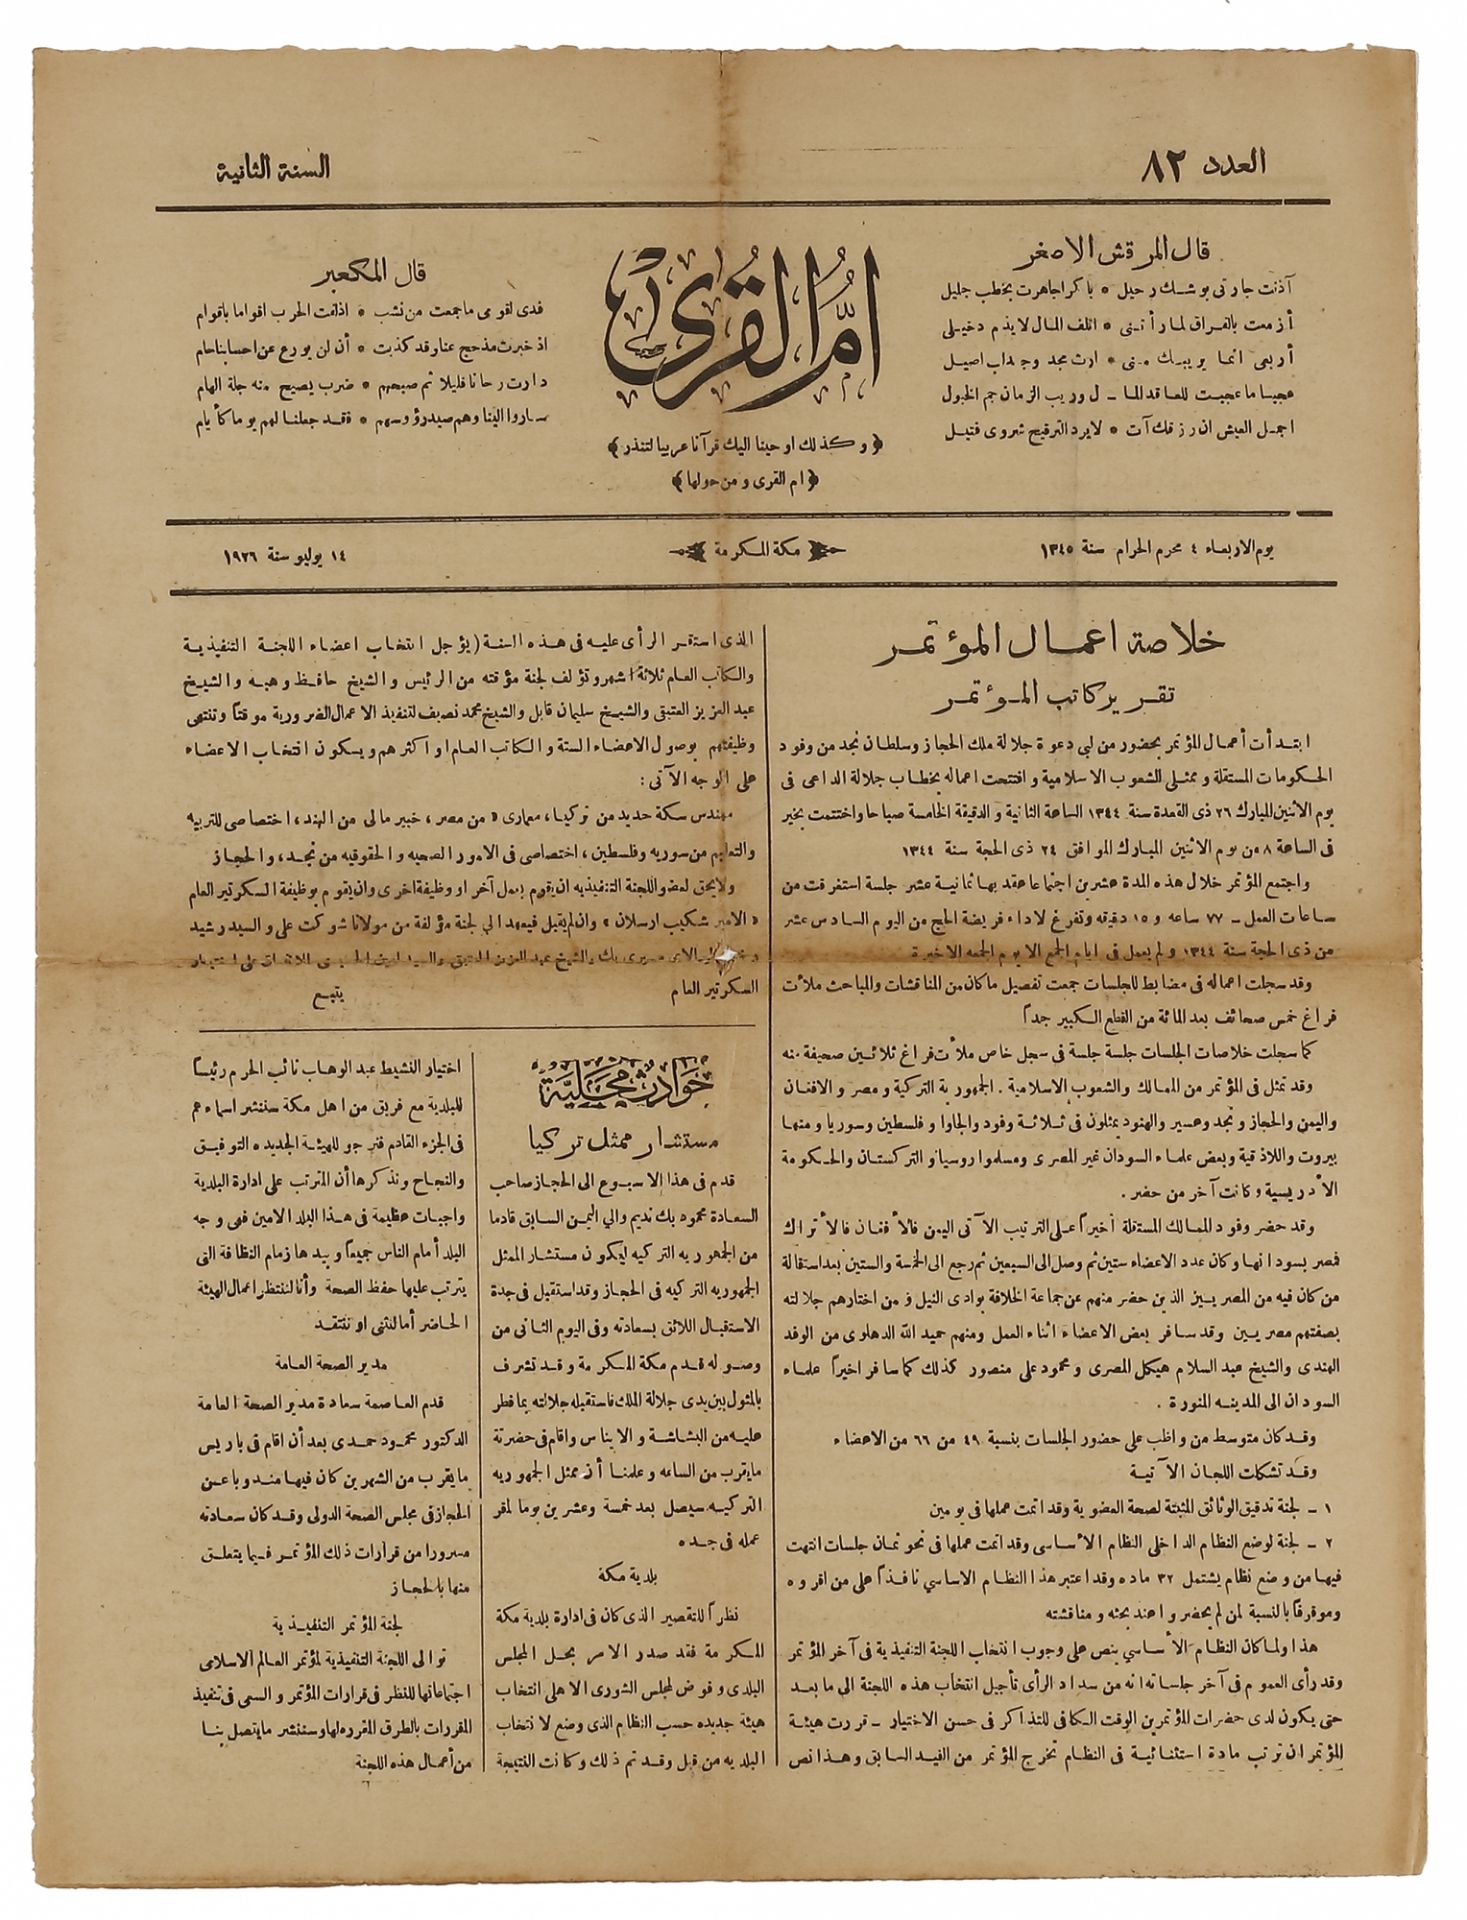 A SELECTION OF THE FIRST NEWSPAPER UMM AL-QURA AS FIRST MODERN-DAY SAUDI ARABIA AND THE OFFICIAL GAZ - Image 2 of 2